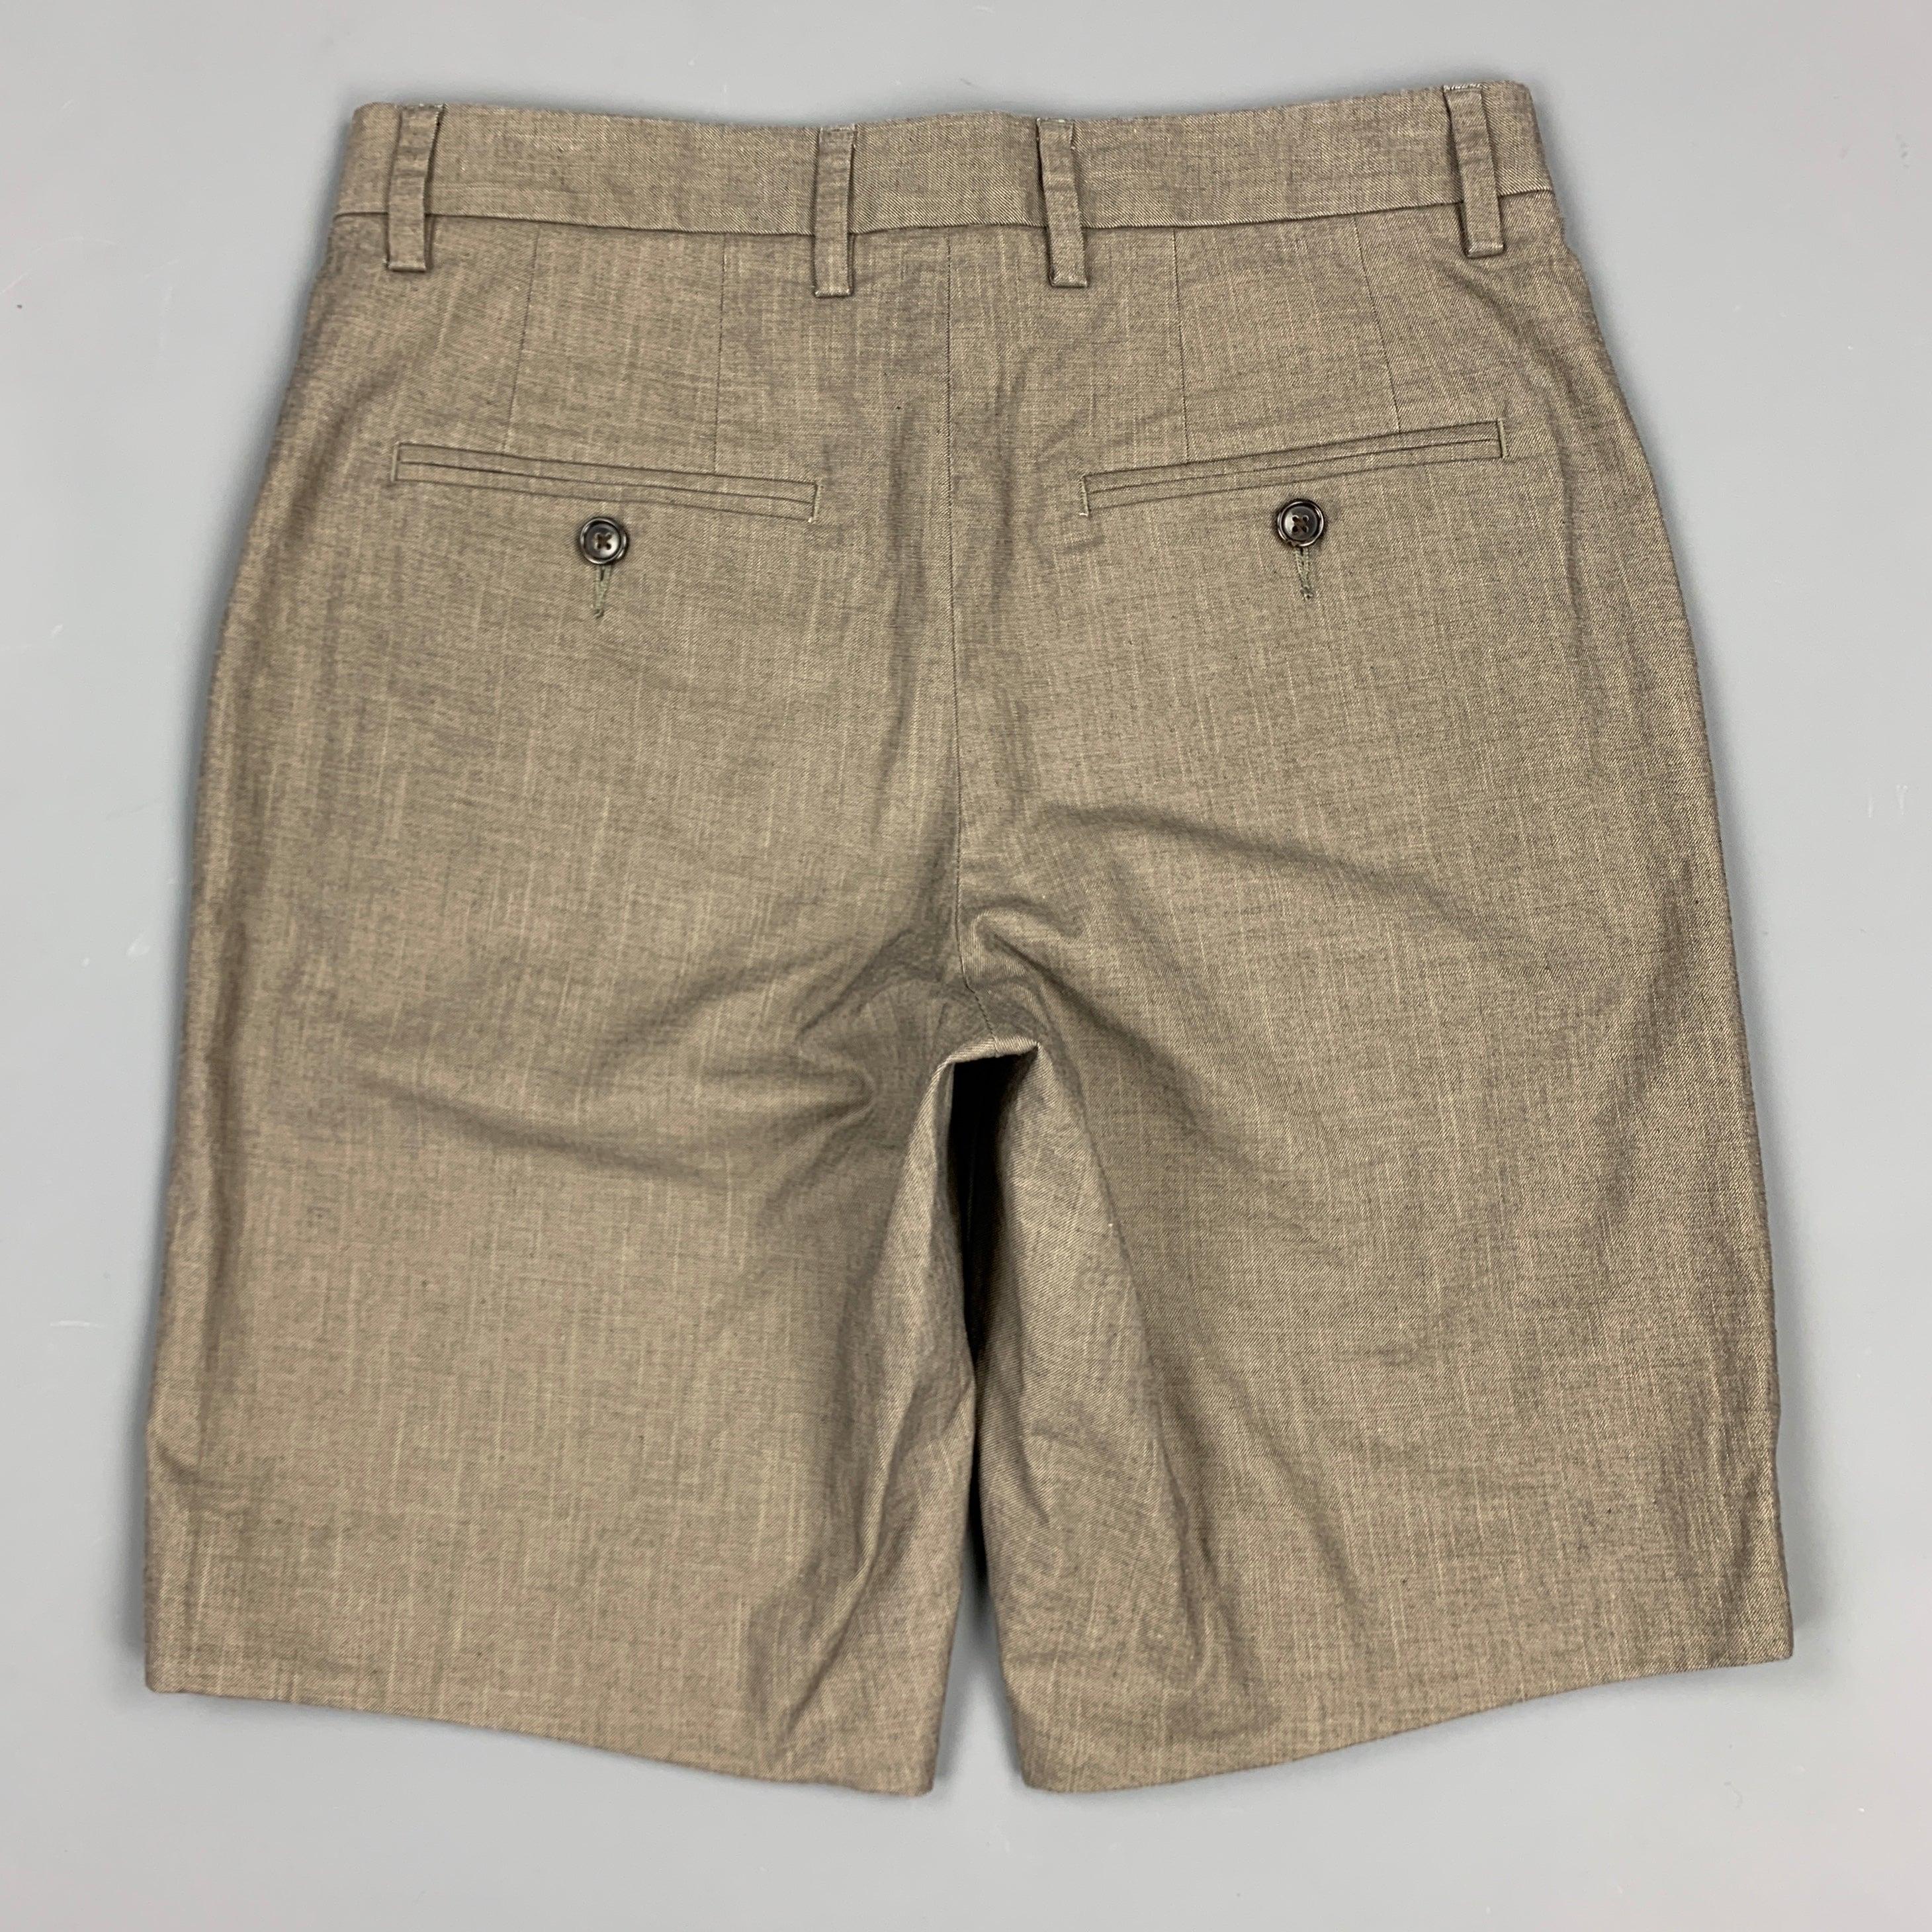 VINCE shorts comes in a slate cotton featuring a zip fly closure.New With Tags. 

Marked:   28 

Measurements: 
  Waist: 30 inches 
Rise: 10 inches 
Inseam: 8.5 inches 
  
  
 
Reference: 83752
Category: Shorts
More Details
    
Brand:  VINCE
Size: 